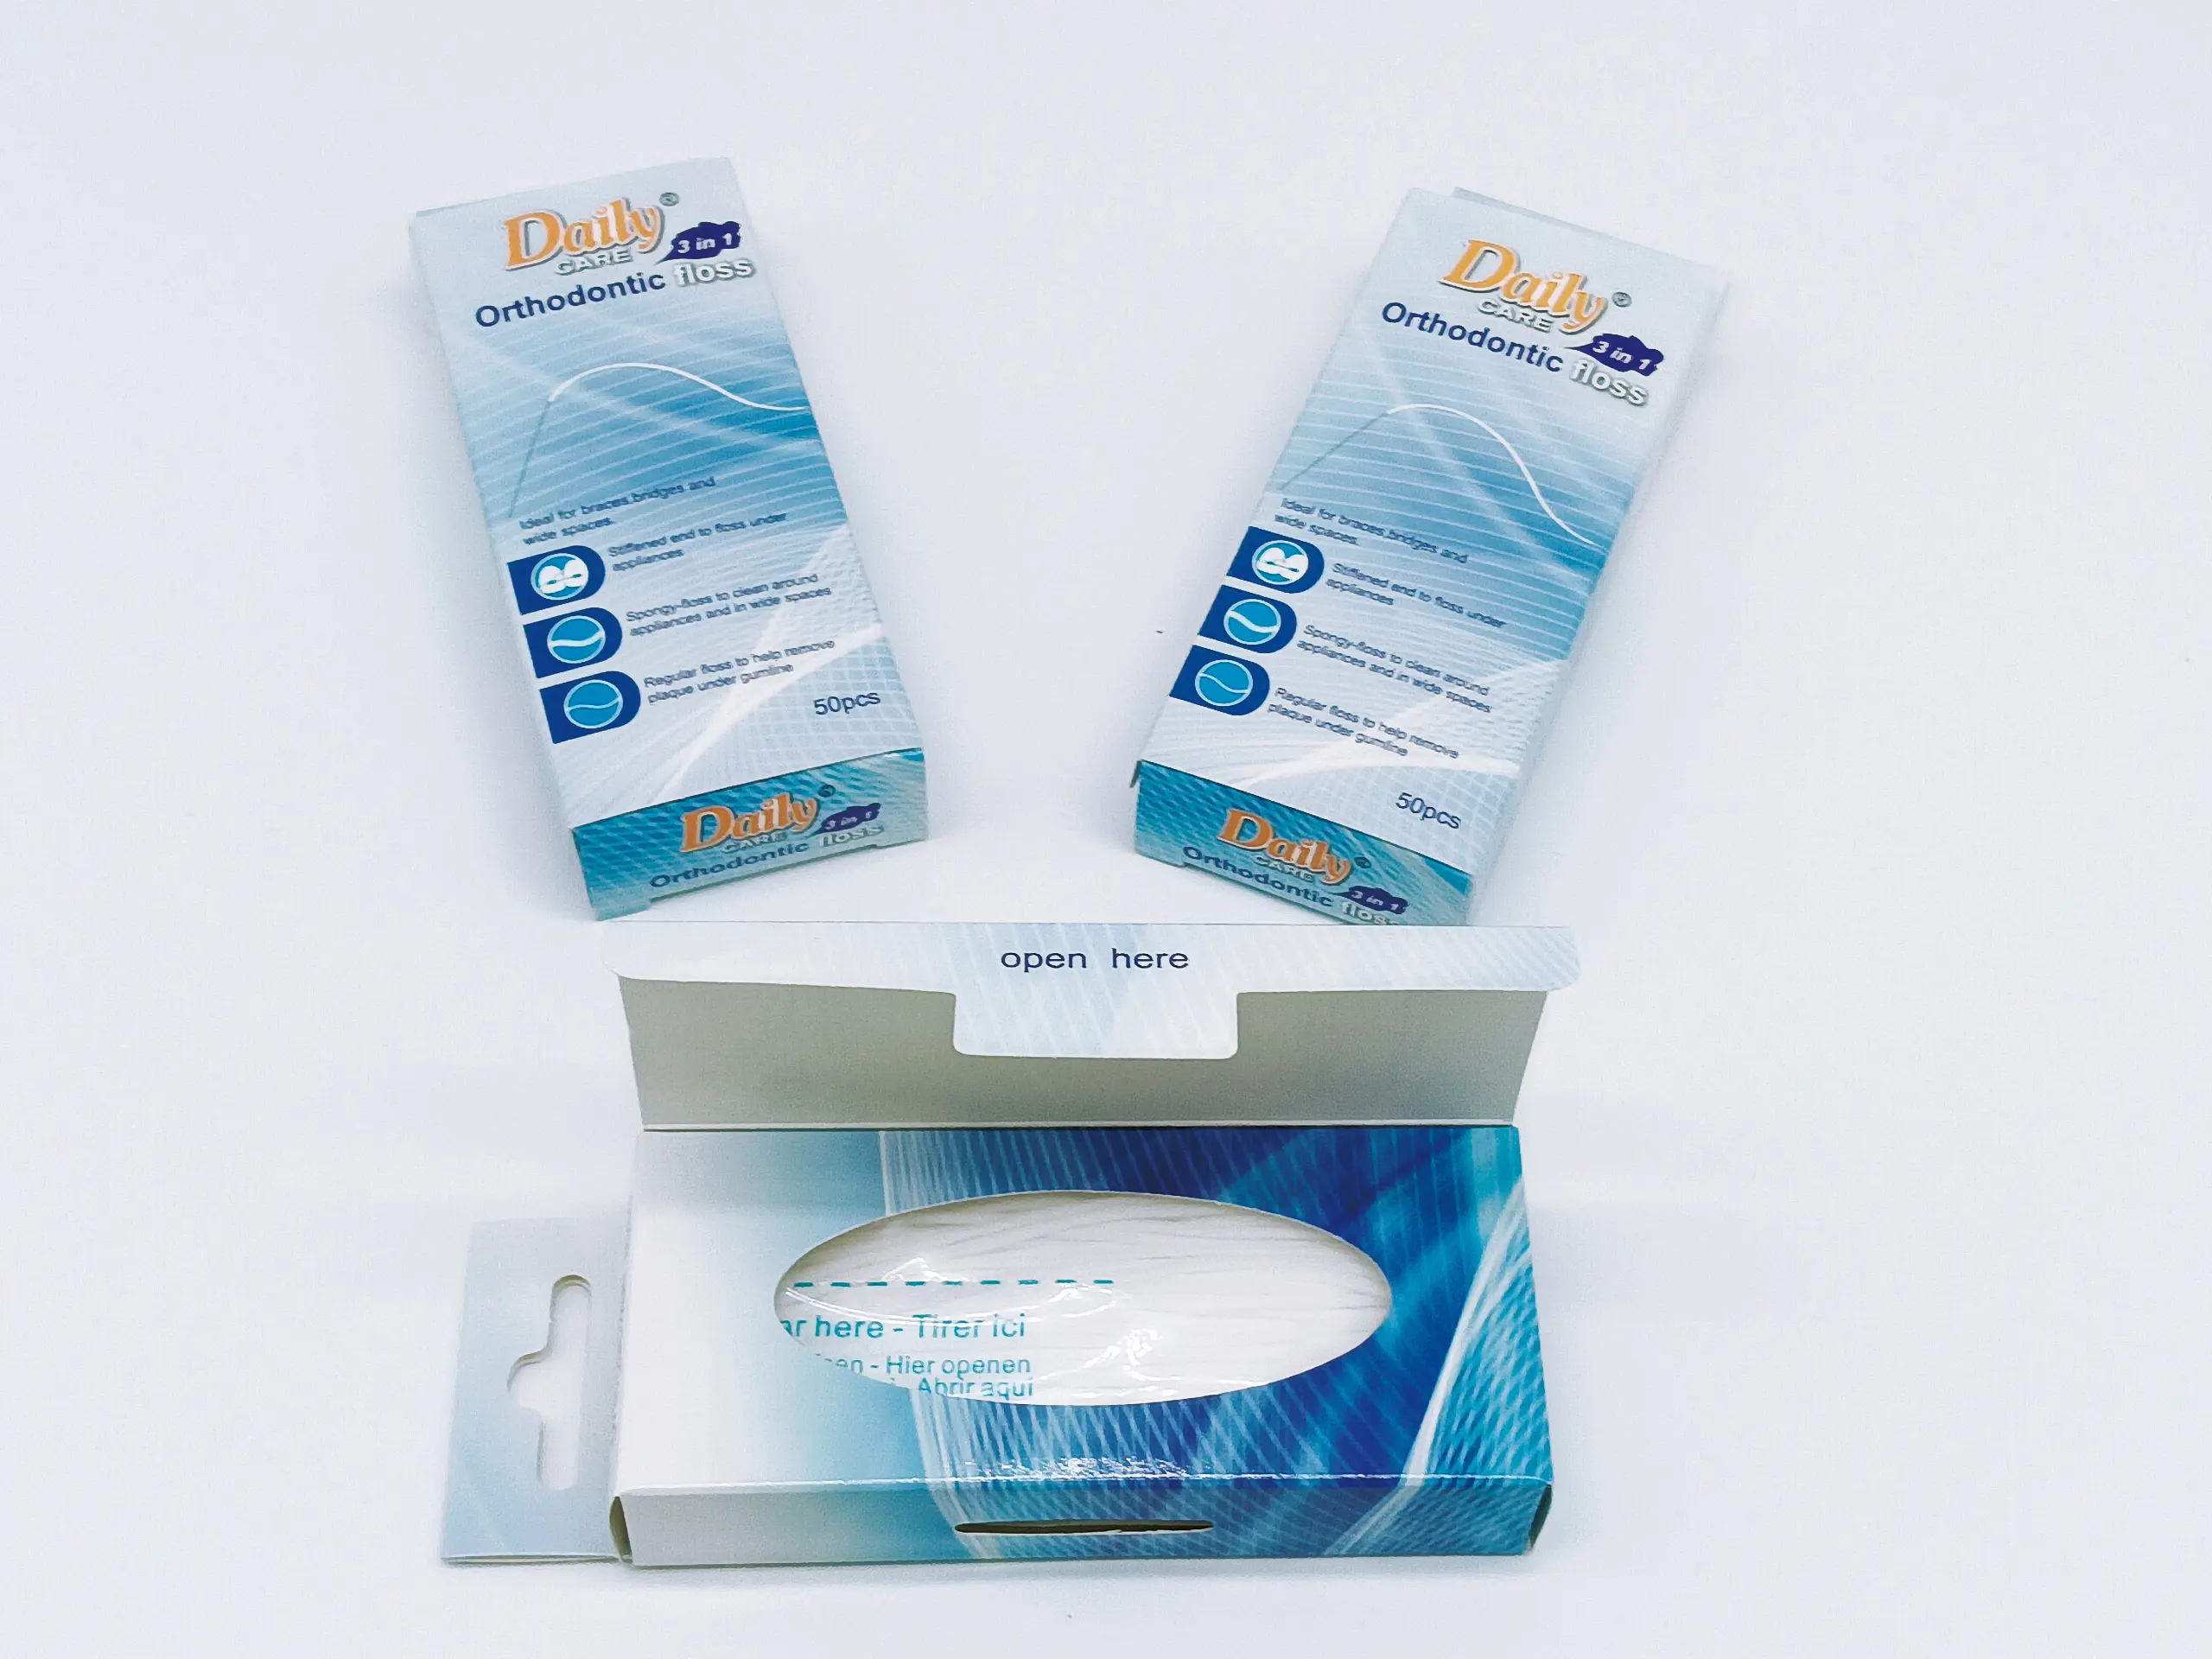 Orthodontic Two-stage Floss Super Menthol Wax Floss For Cleaning Braces.